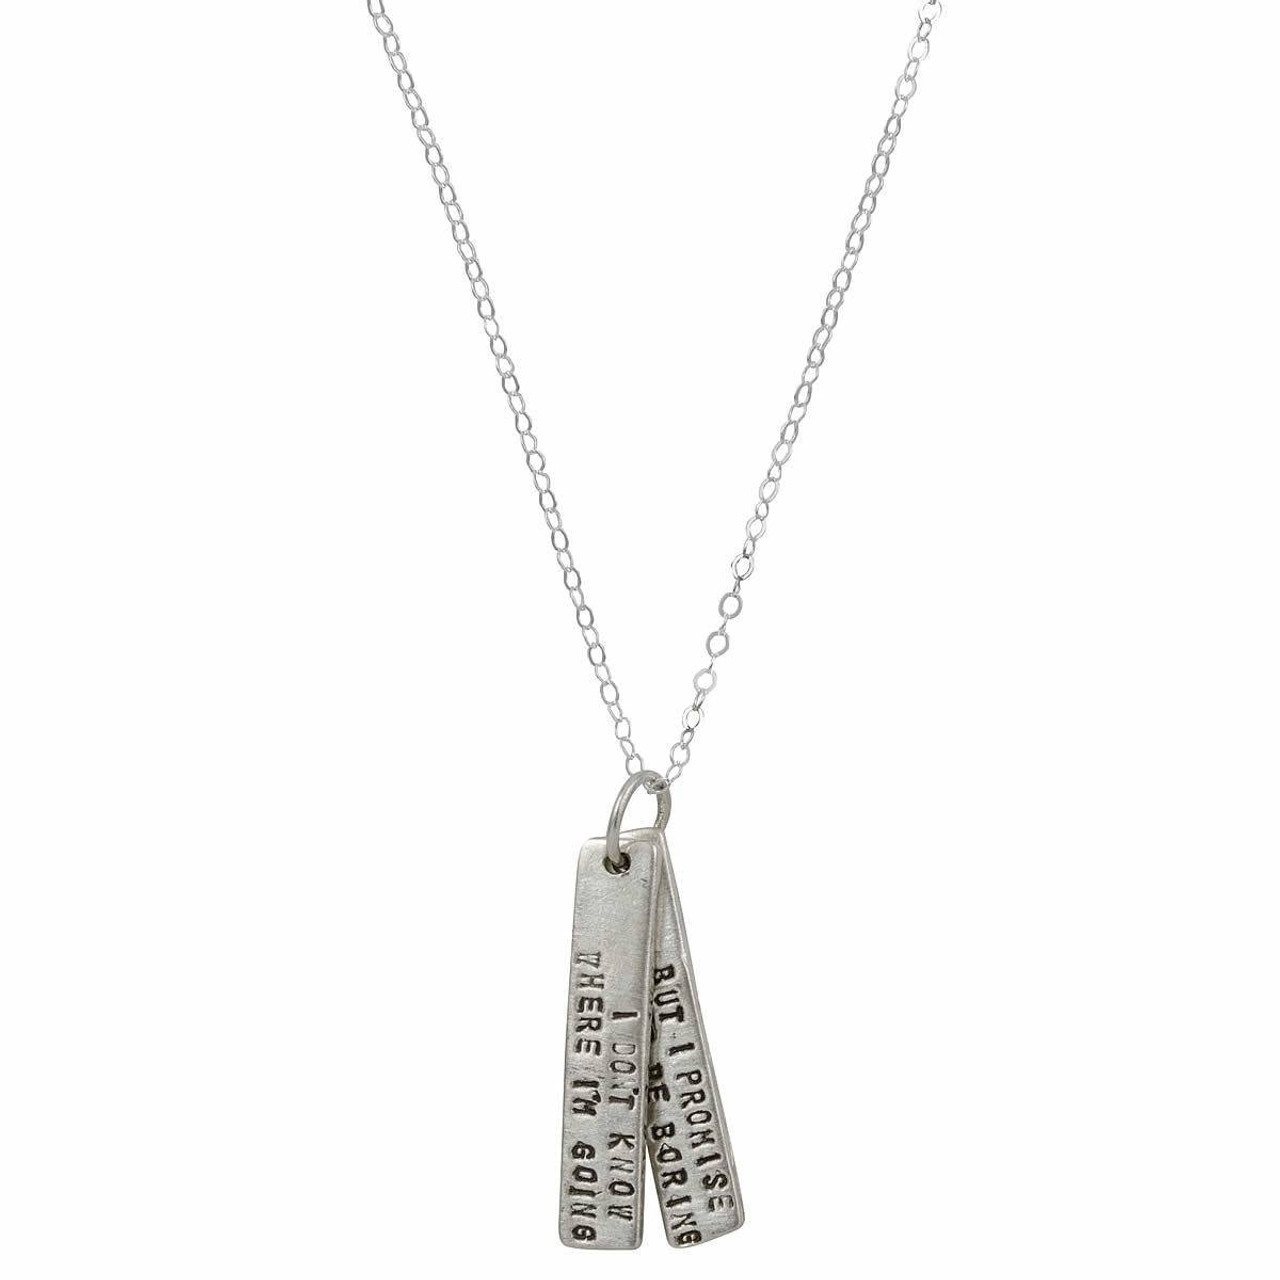 Bowie's Promise Necklace | David Bowie | Chocolate and Steel